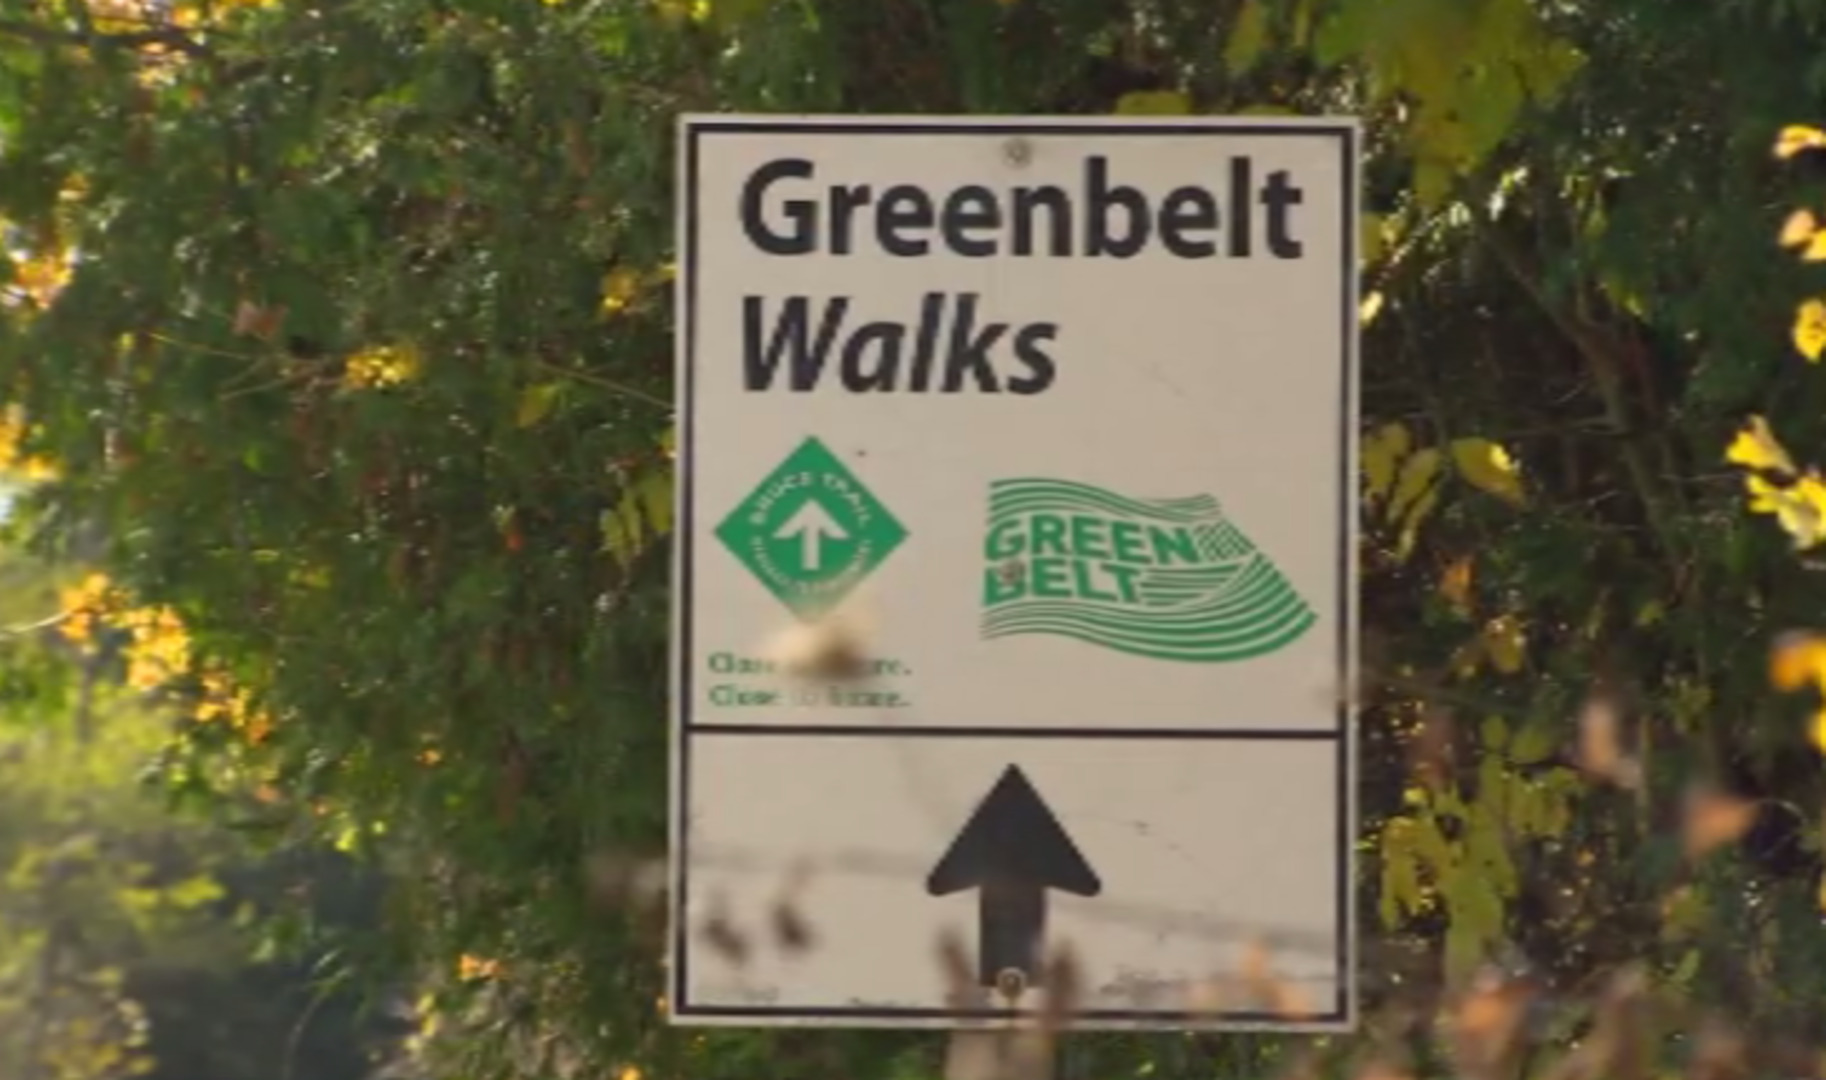 Ontario liberals urge RCMP to provide update on Greenbelt investigation